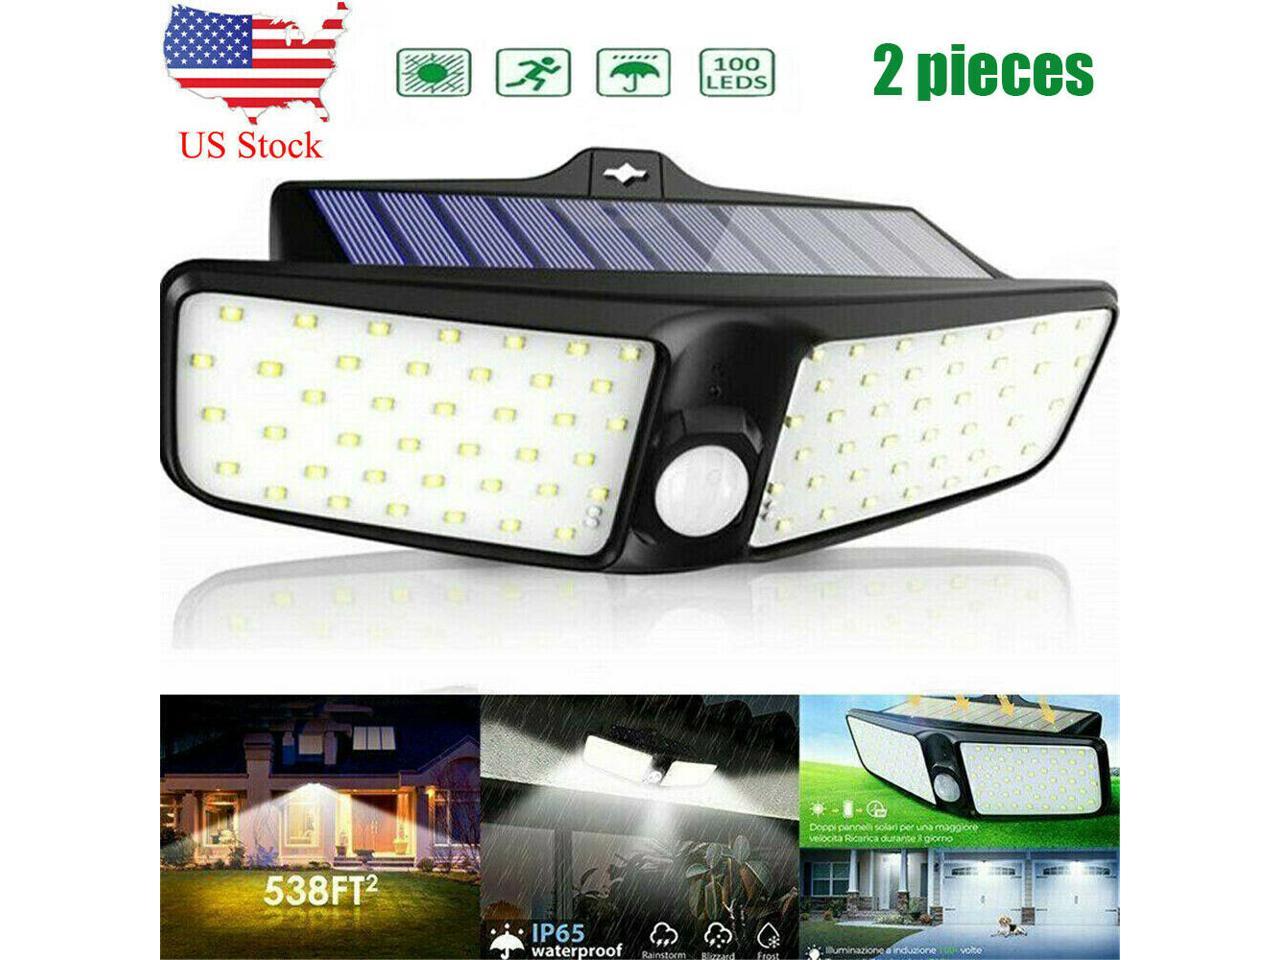 Details about  / Solar 100 LED Dual Security Detector Light Lamp Motion Sensor Outdoor Waterproof